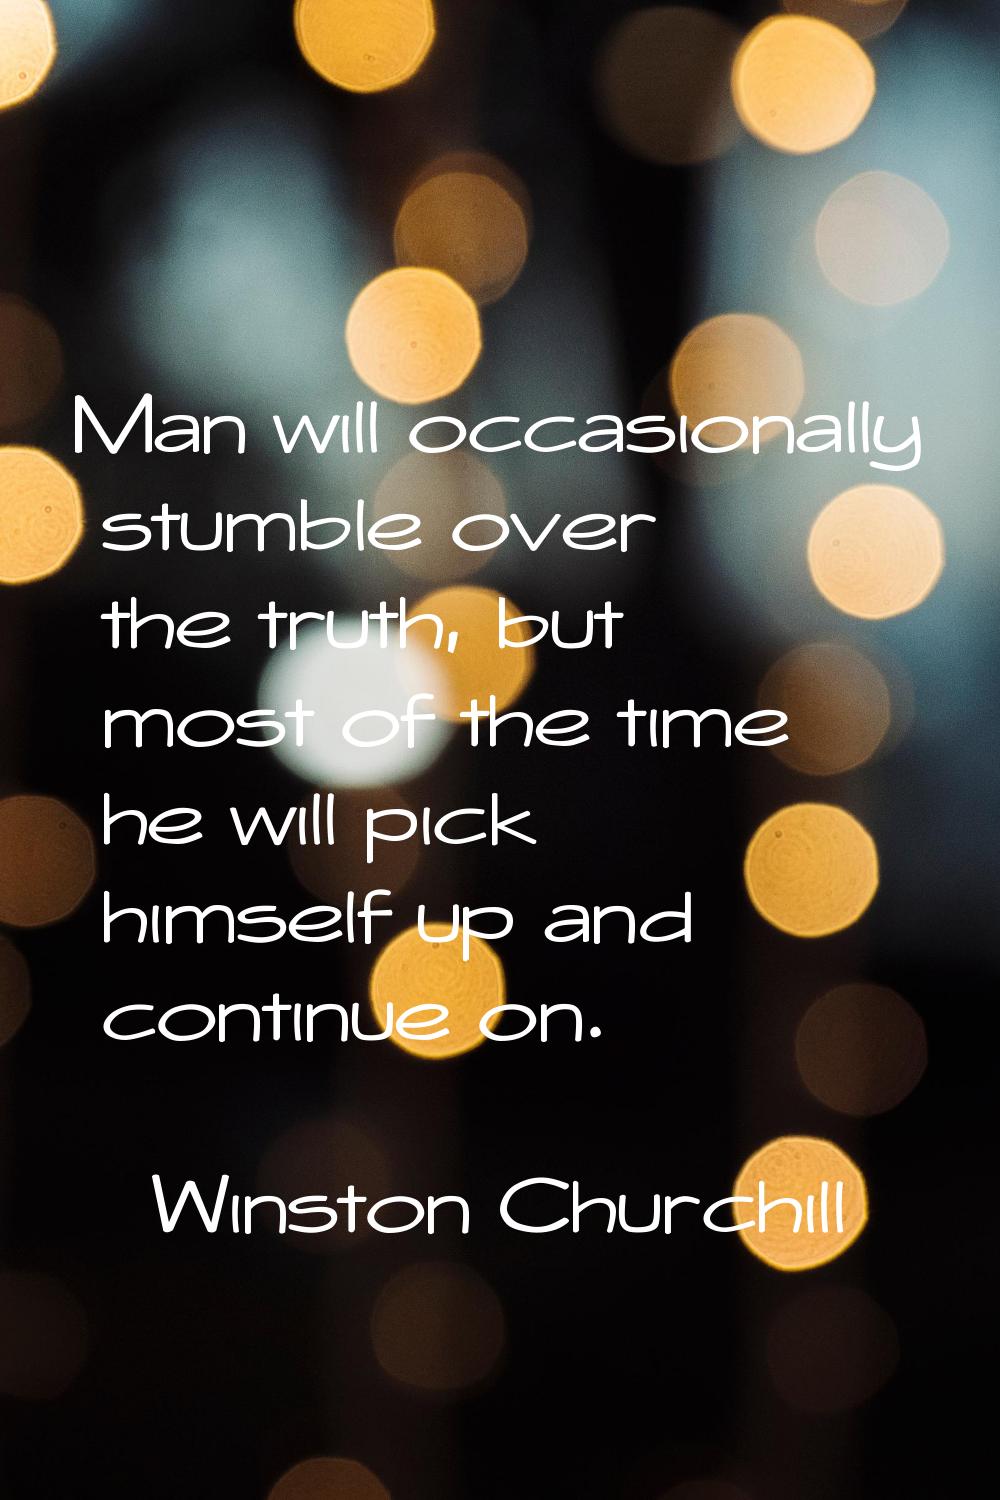 Man will occasionally stumble over the truth, but most of the time he will pick himself up and cont